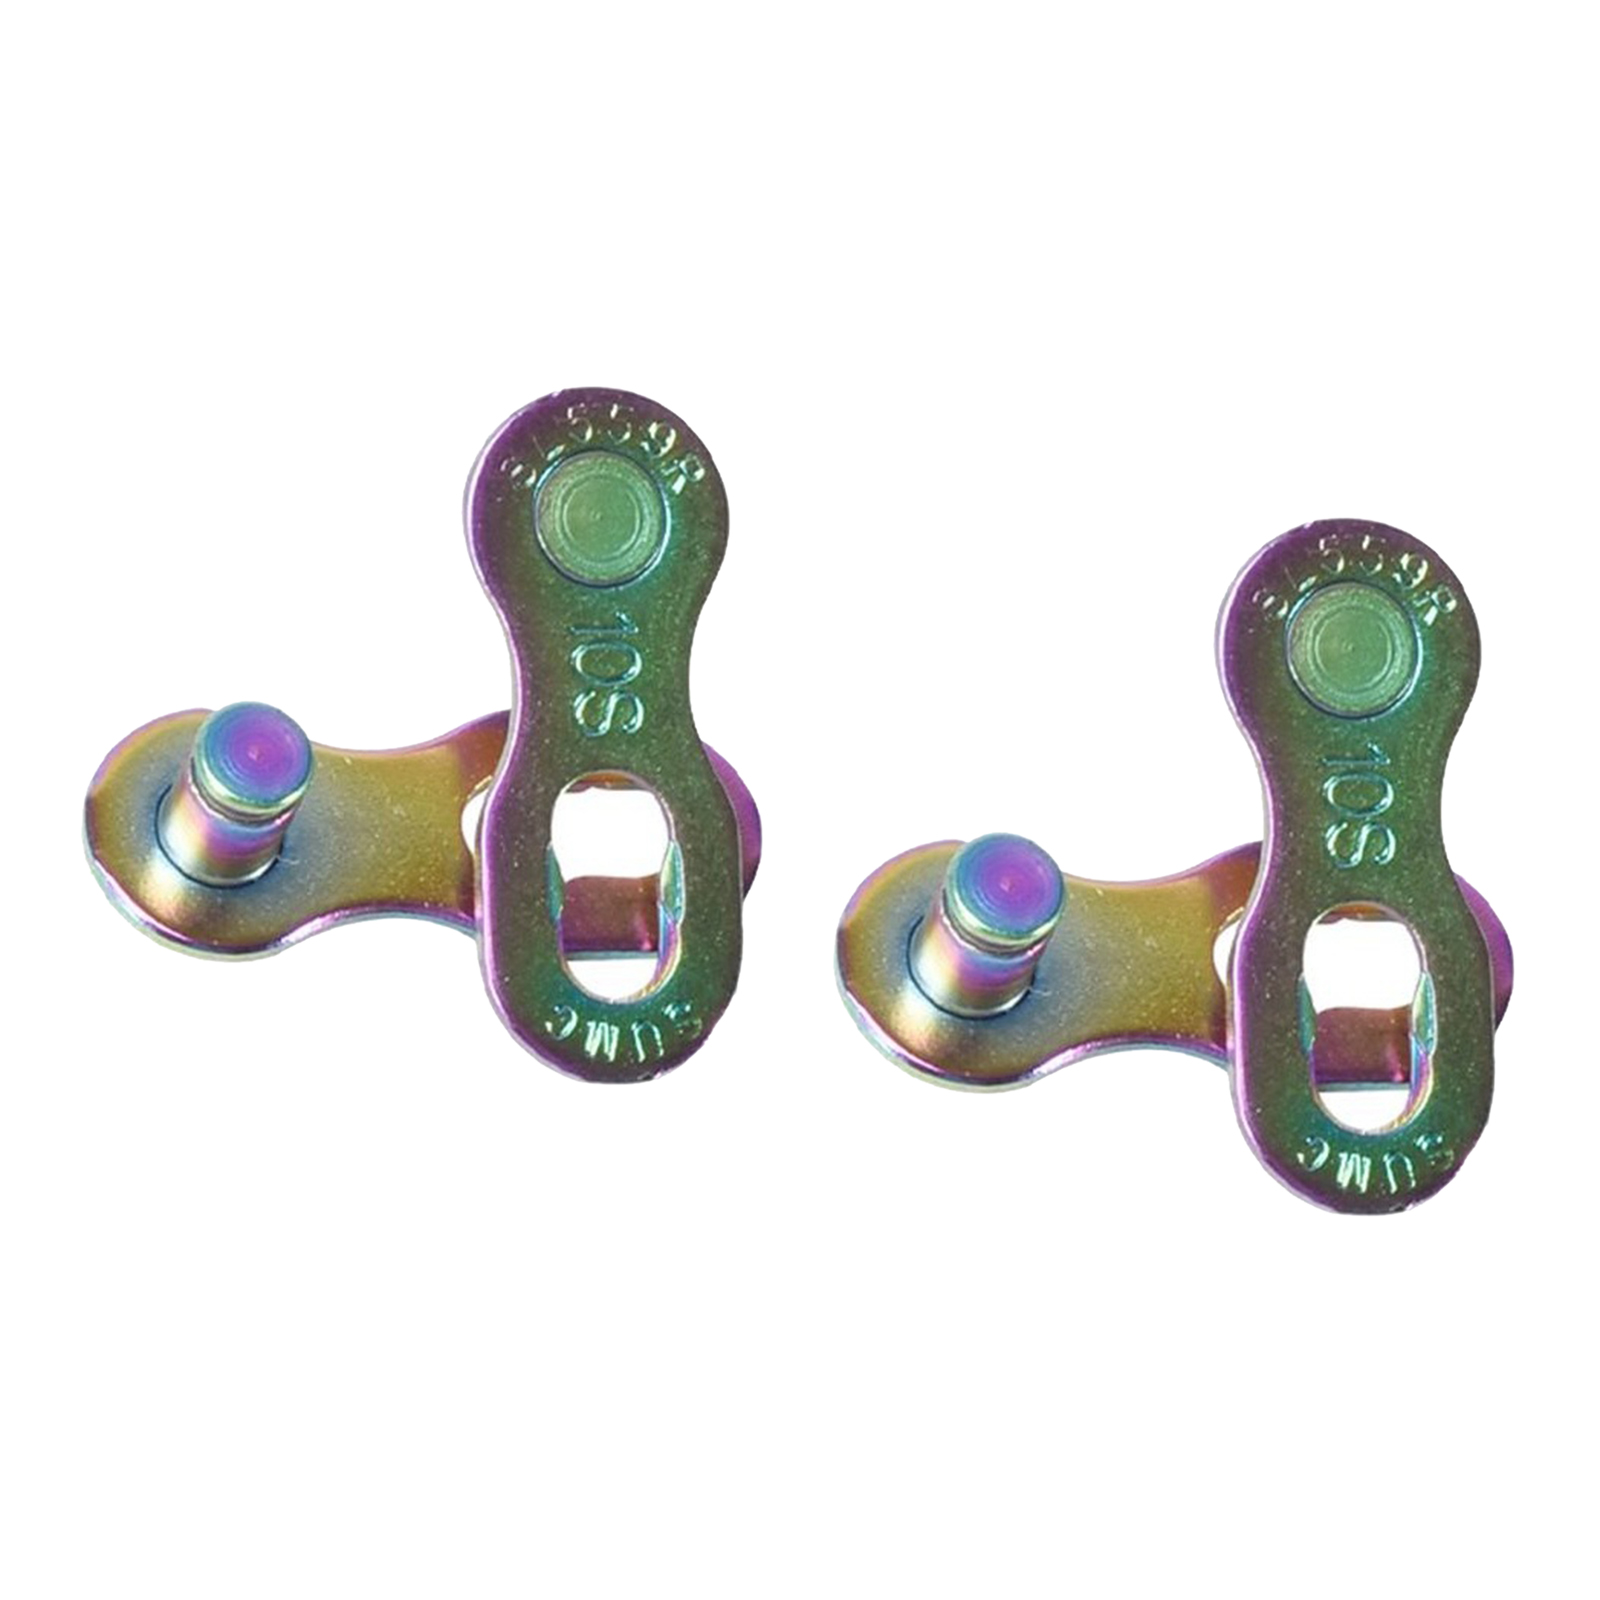 Bubble Shop61 2Pair 9/10/11/12Speed Bicycle Bike Master Chain Link Joint 9 Speed Colorful